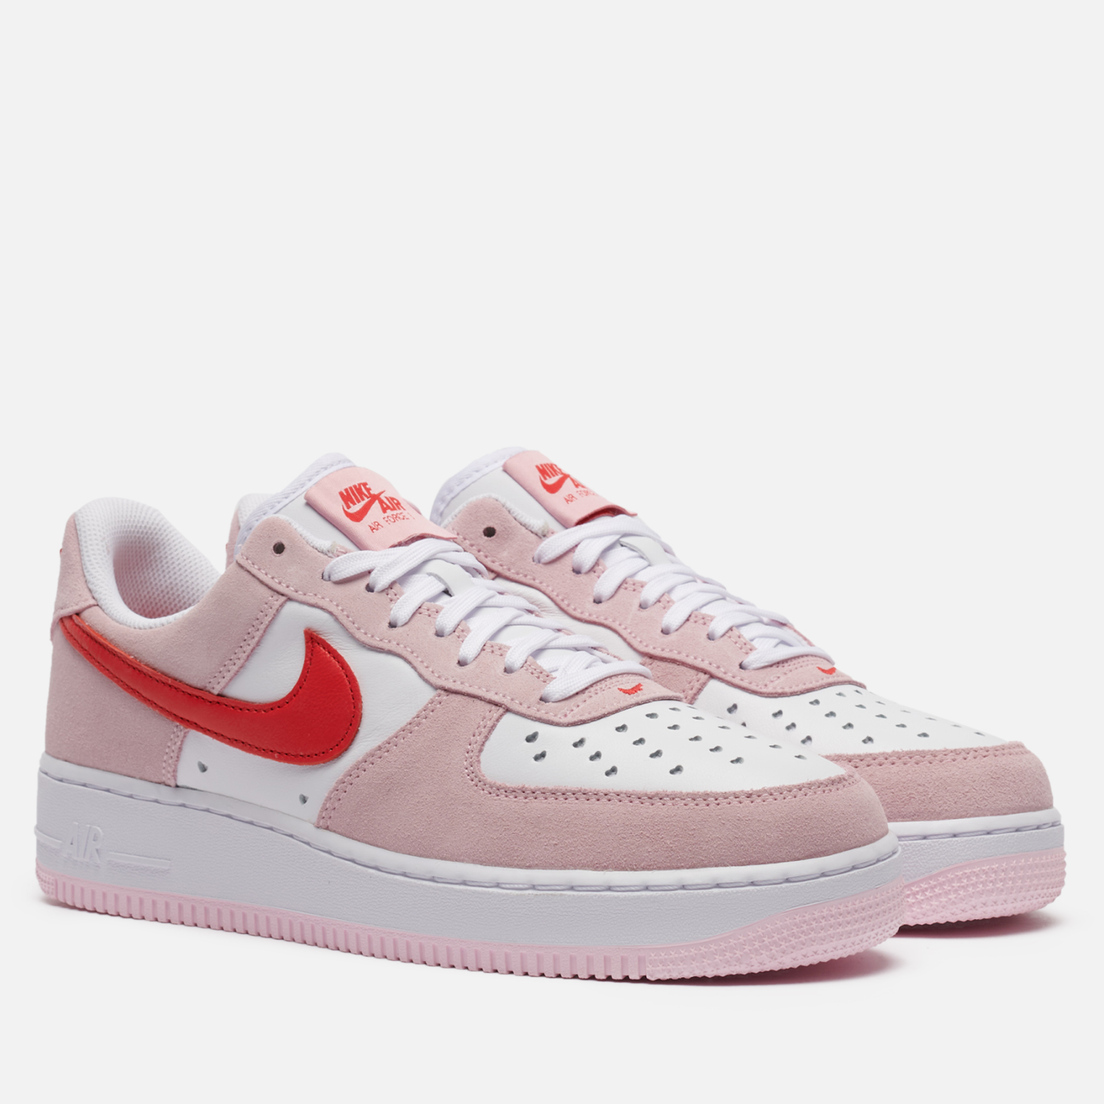 Nike air force low valentine s day. Nike Air Force 1 Valentine's. Nike Air Force 1 Low “Valentine’s Day” 2023. Nike Air Force 1 Low Valentines Day. Nike Air Force 1 07 QS Valentine's Day.